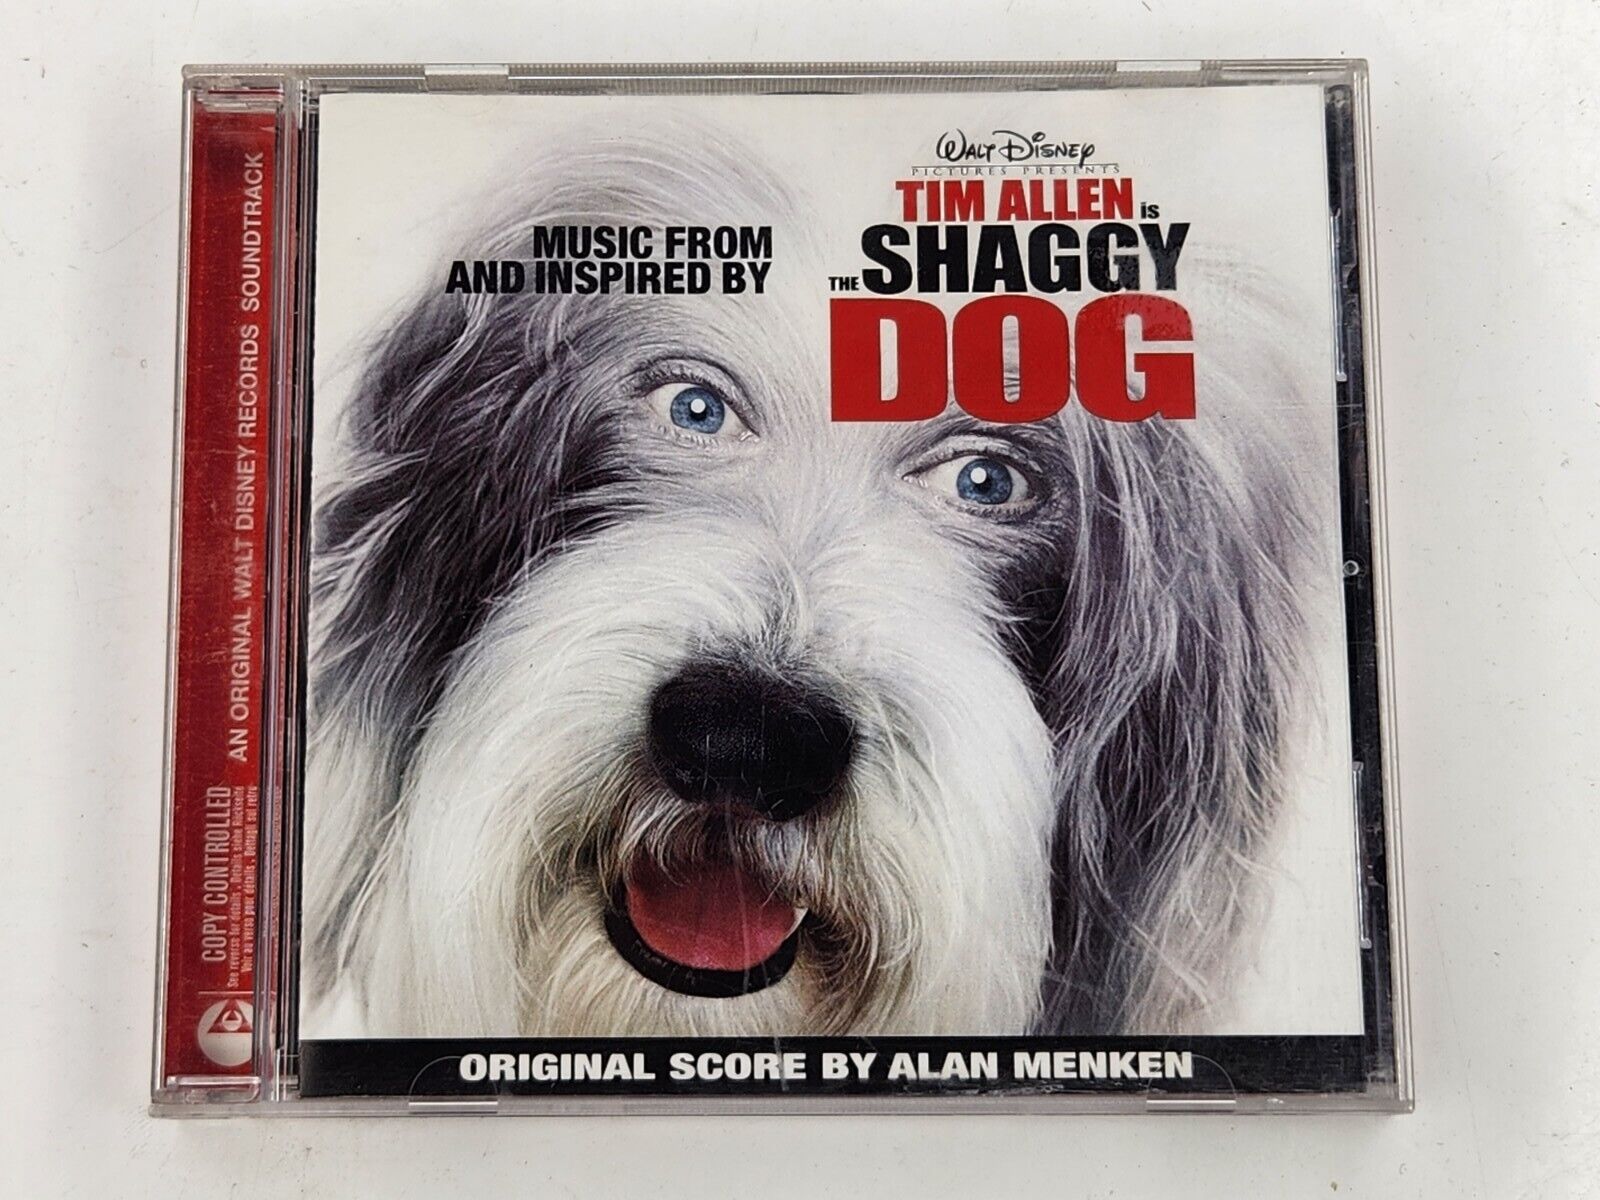 Alan Menken-The Shaggy Dog (Music From And Inspired) CD Walt Disney Records